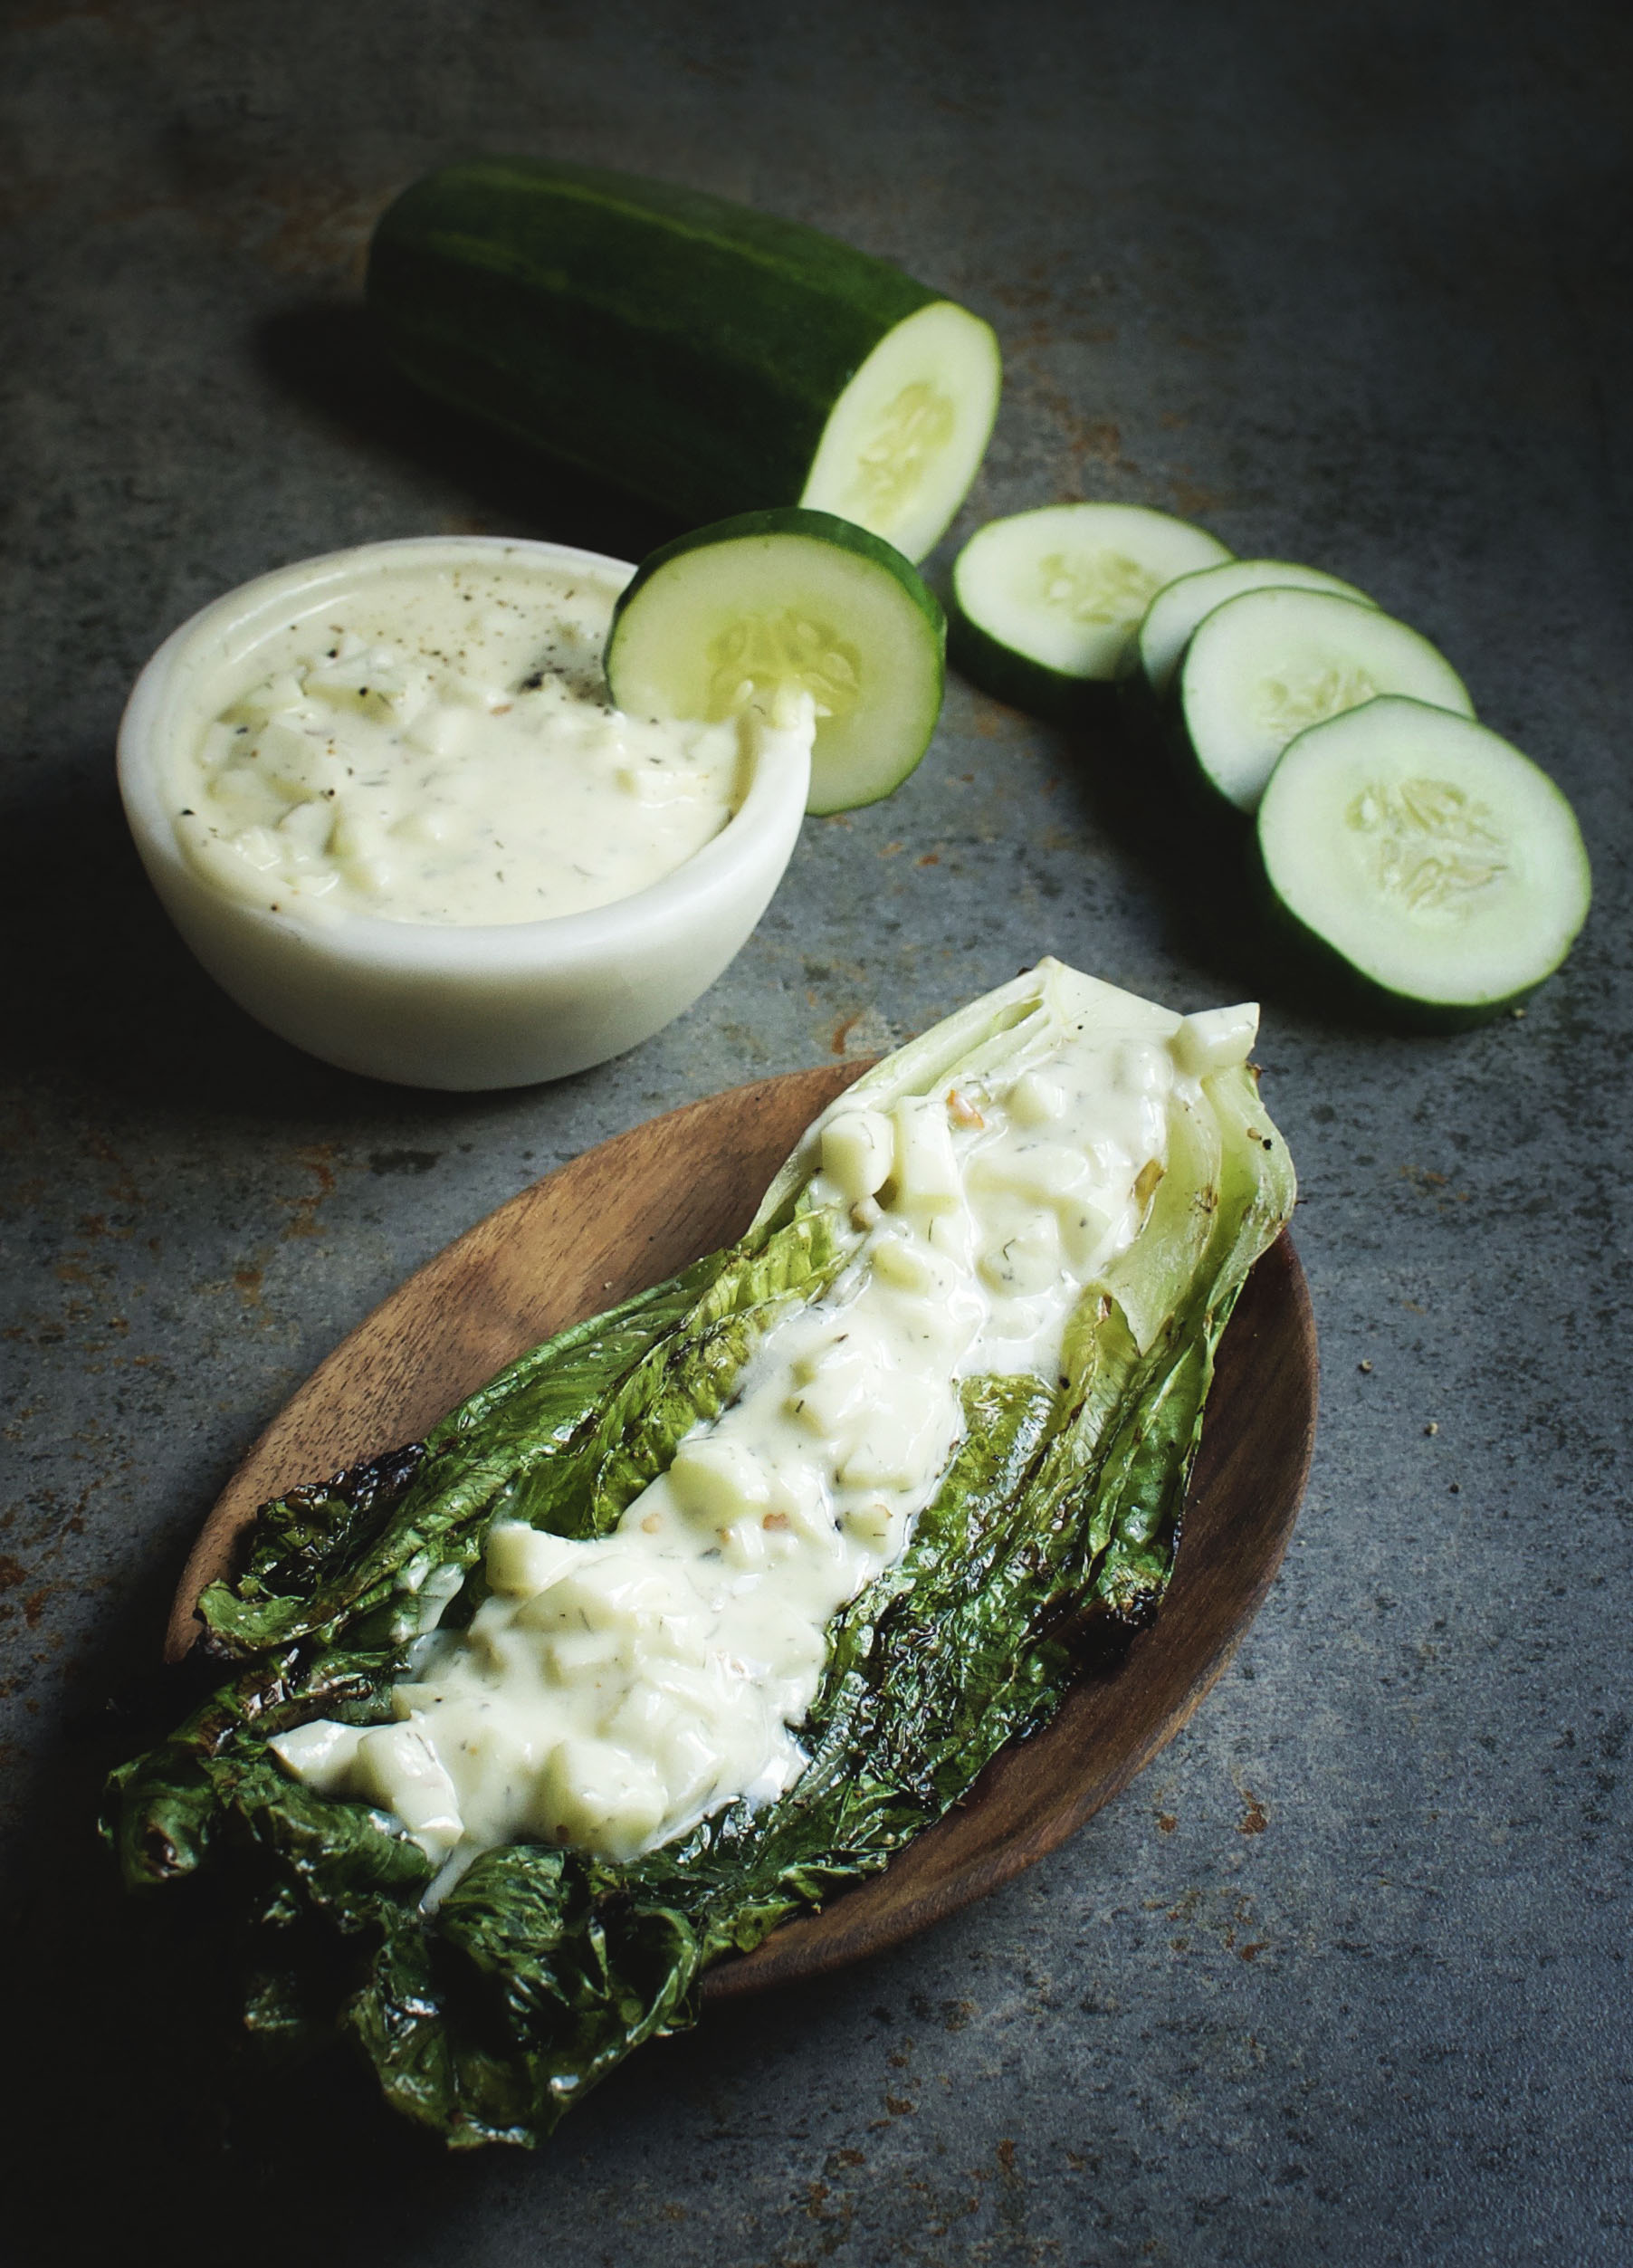 Grilled Romaine with Cucumber Dill Dressing